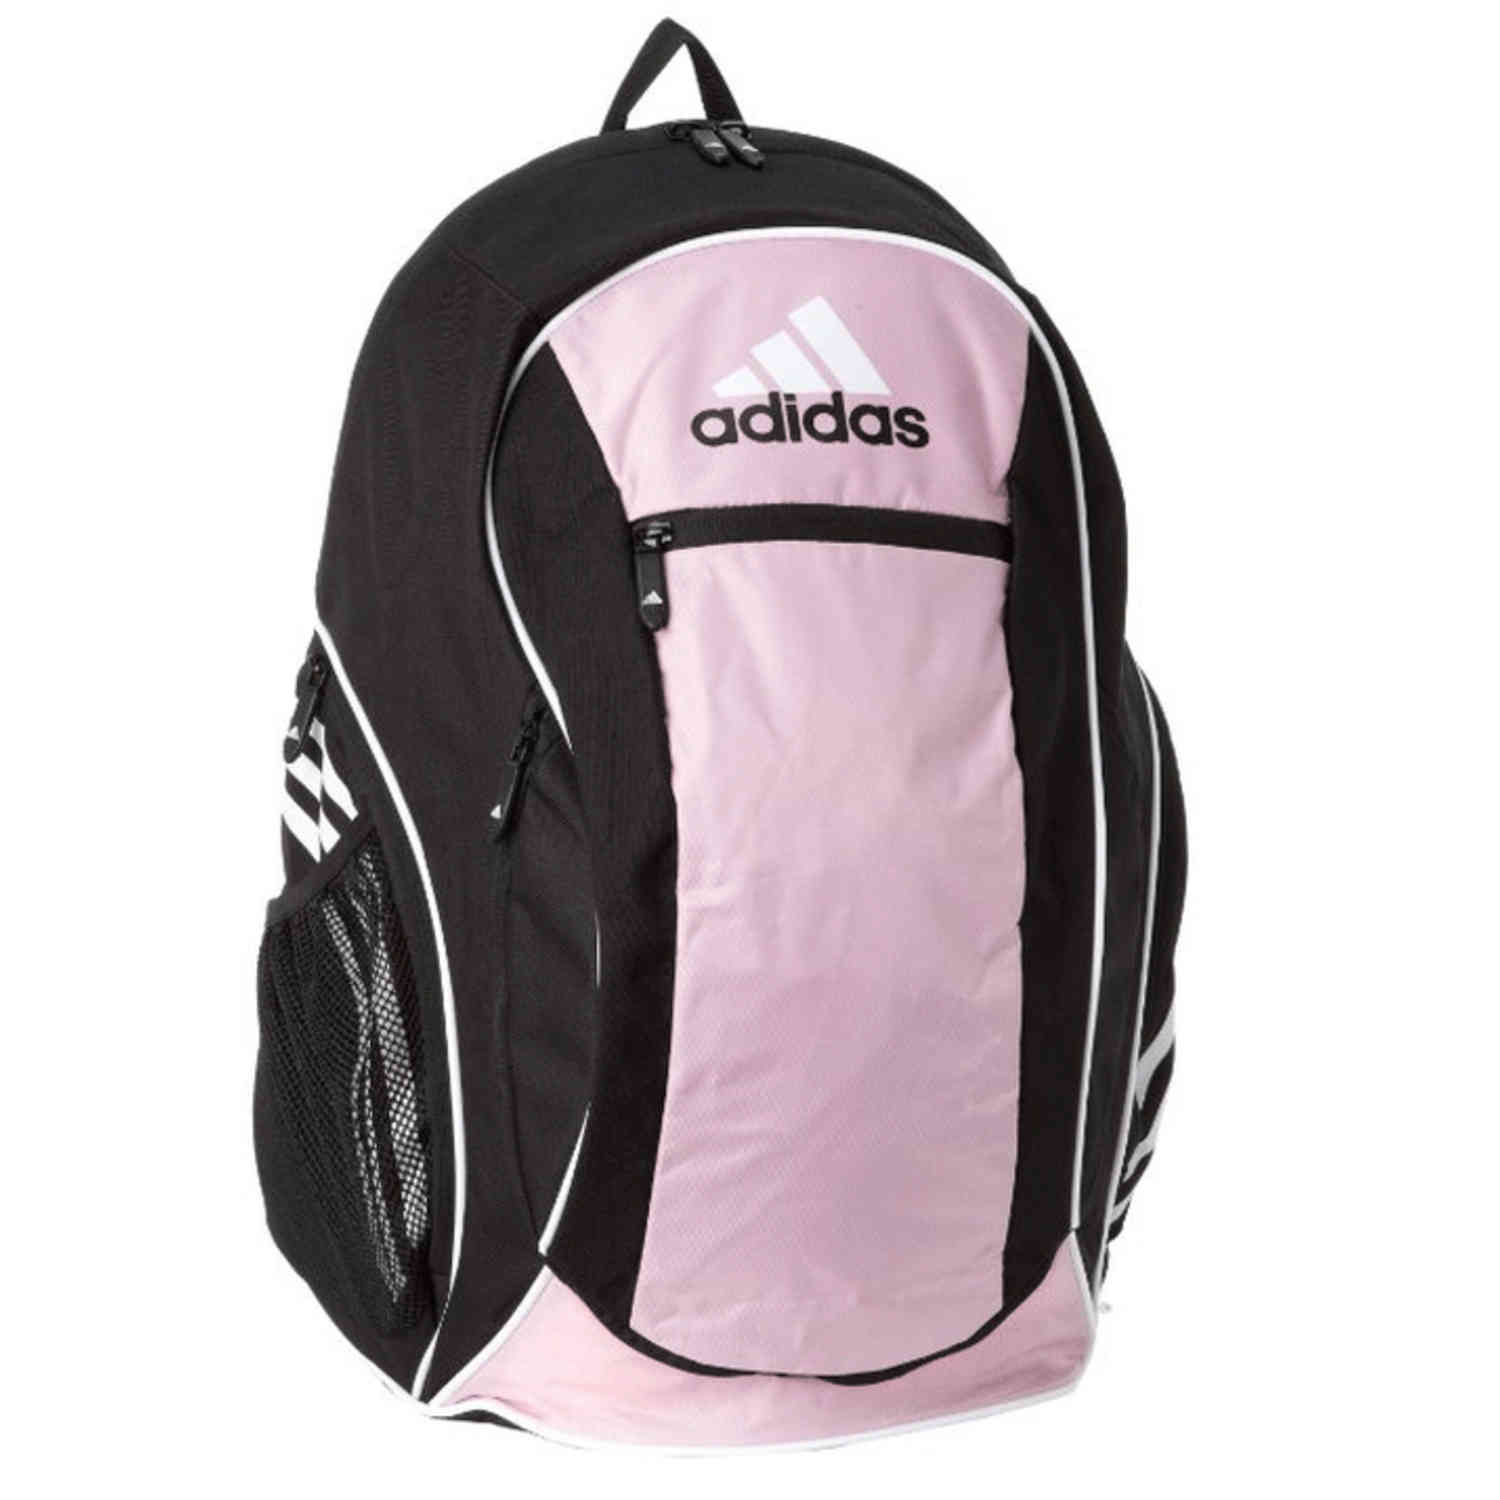 adidas backpack with ball holder